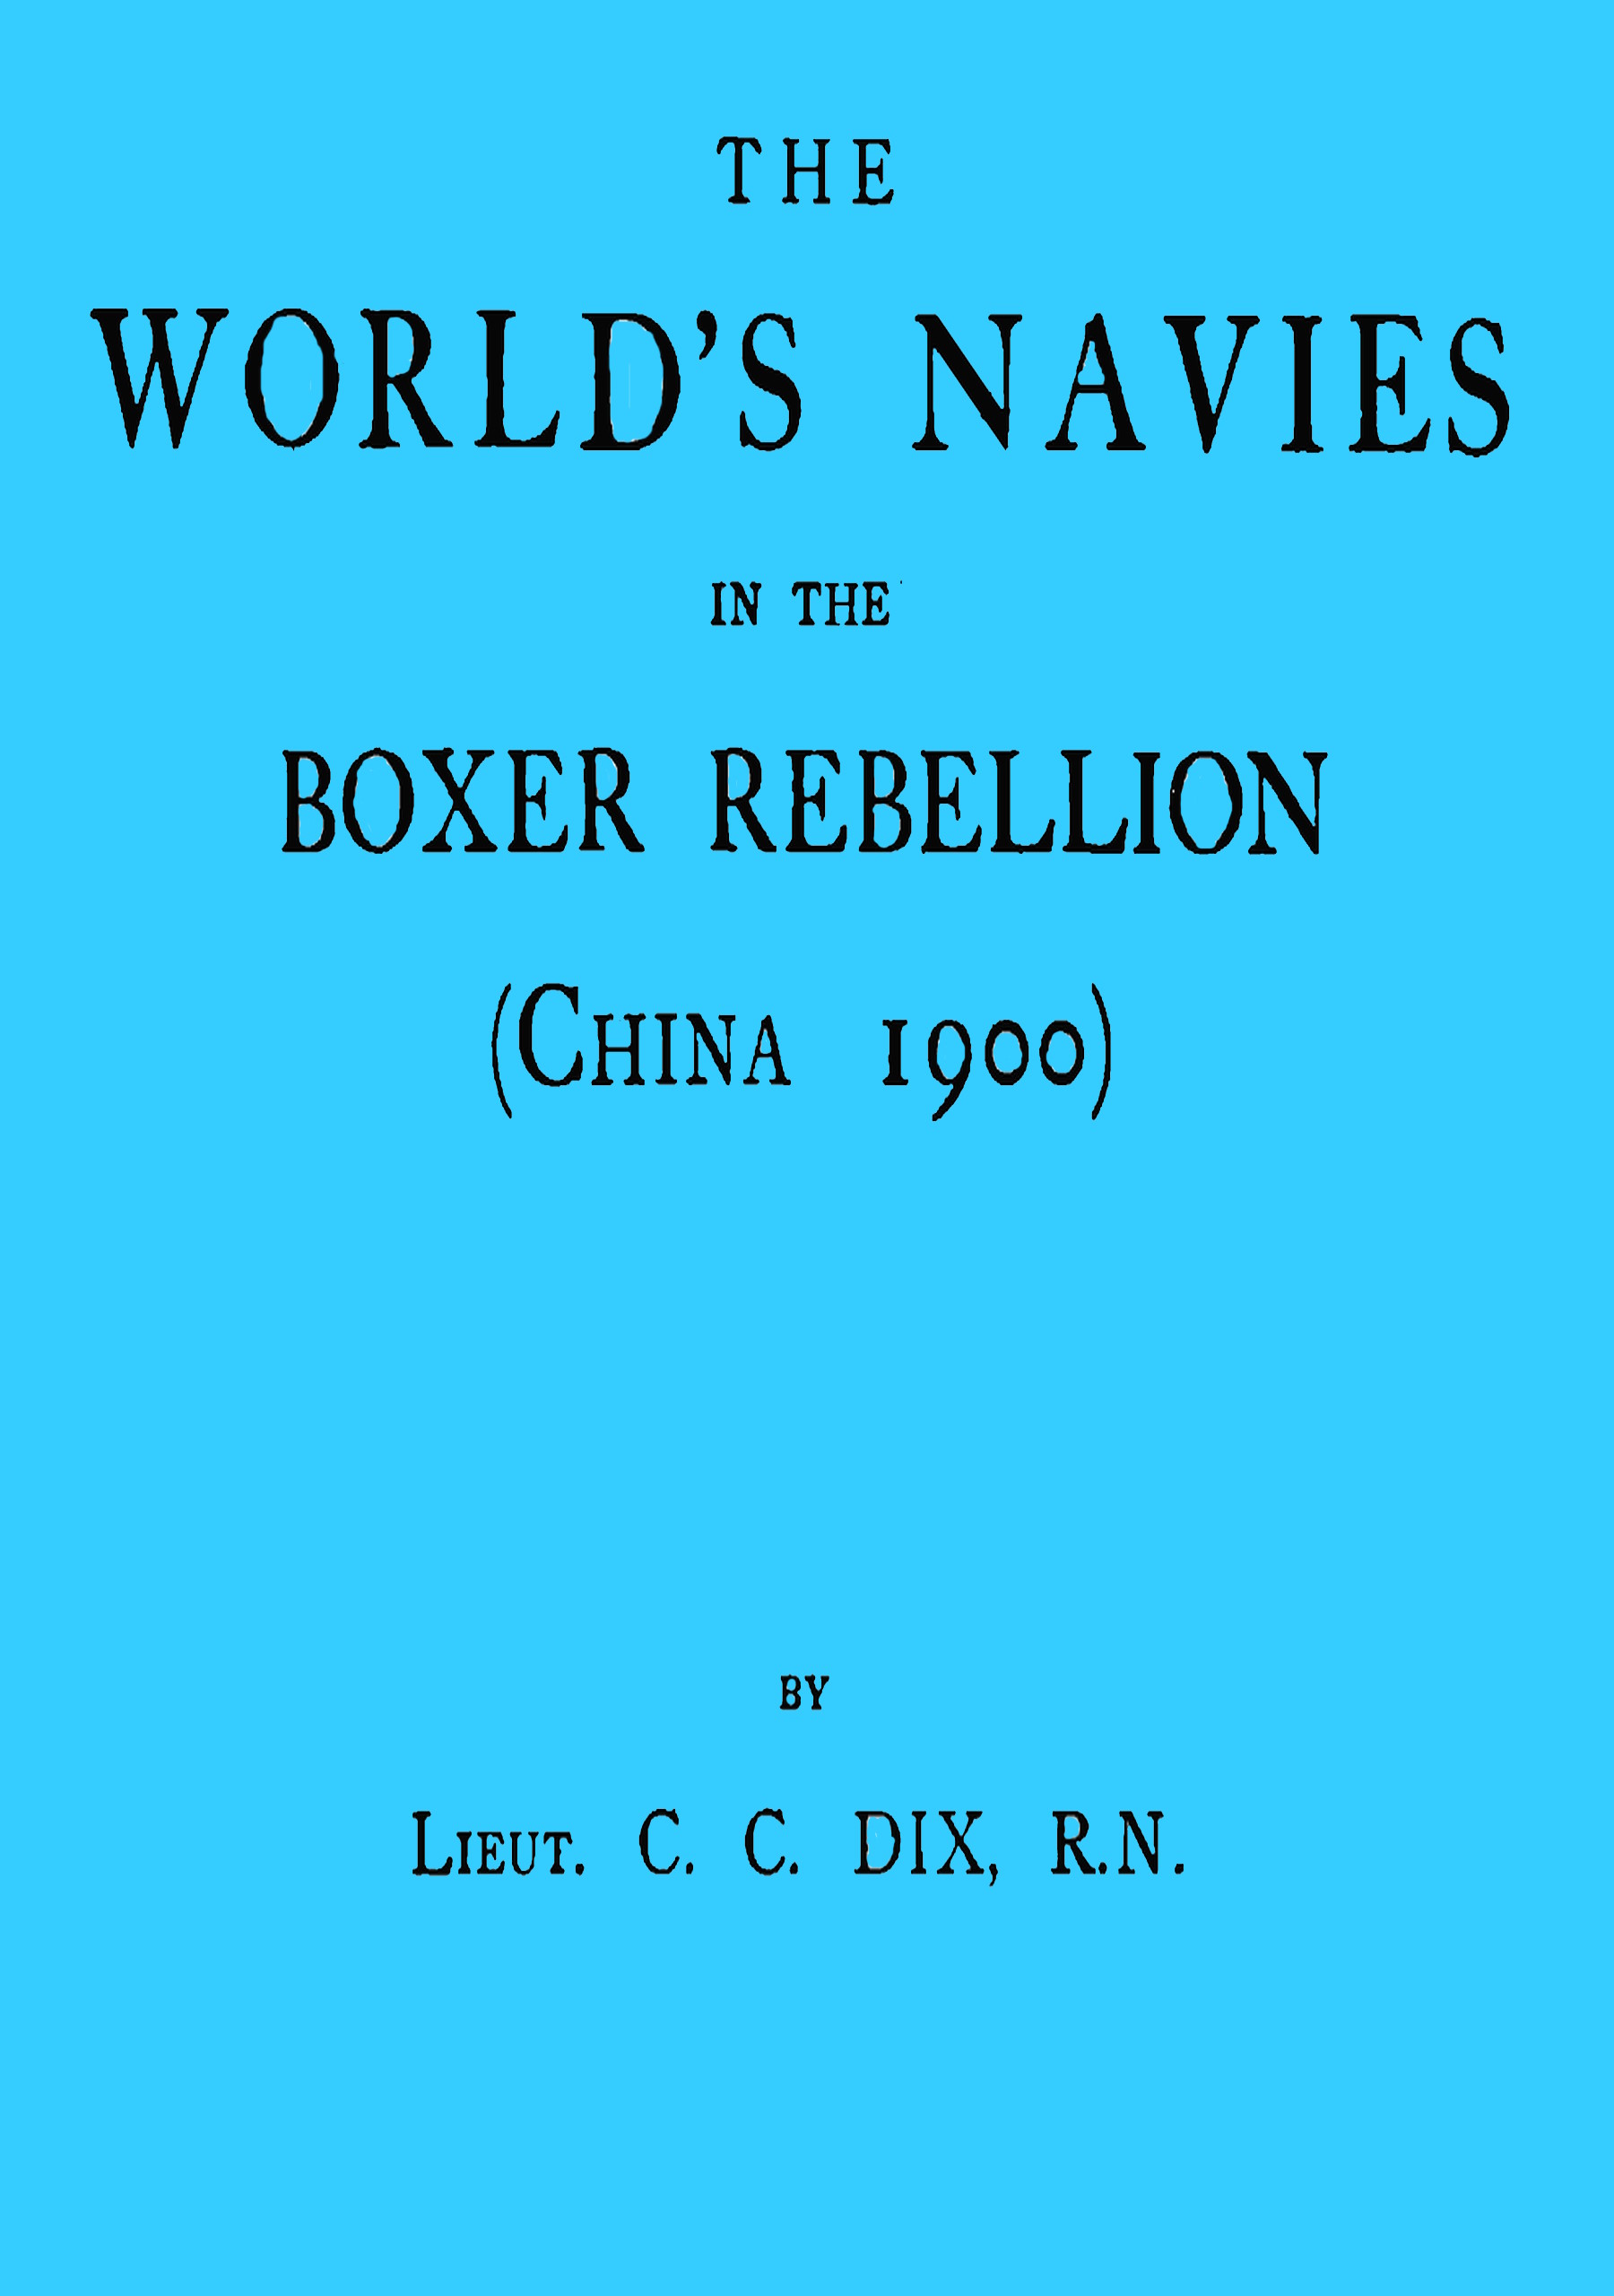 The world's navies in the Boxer rebellion (China 1900)